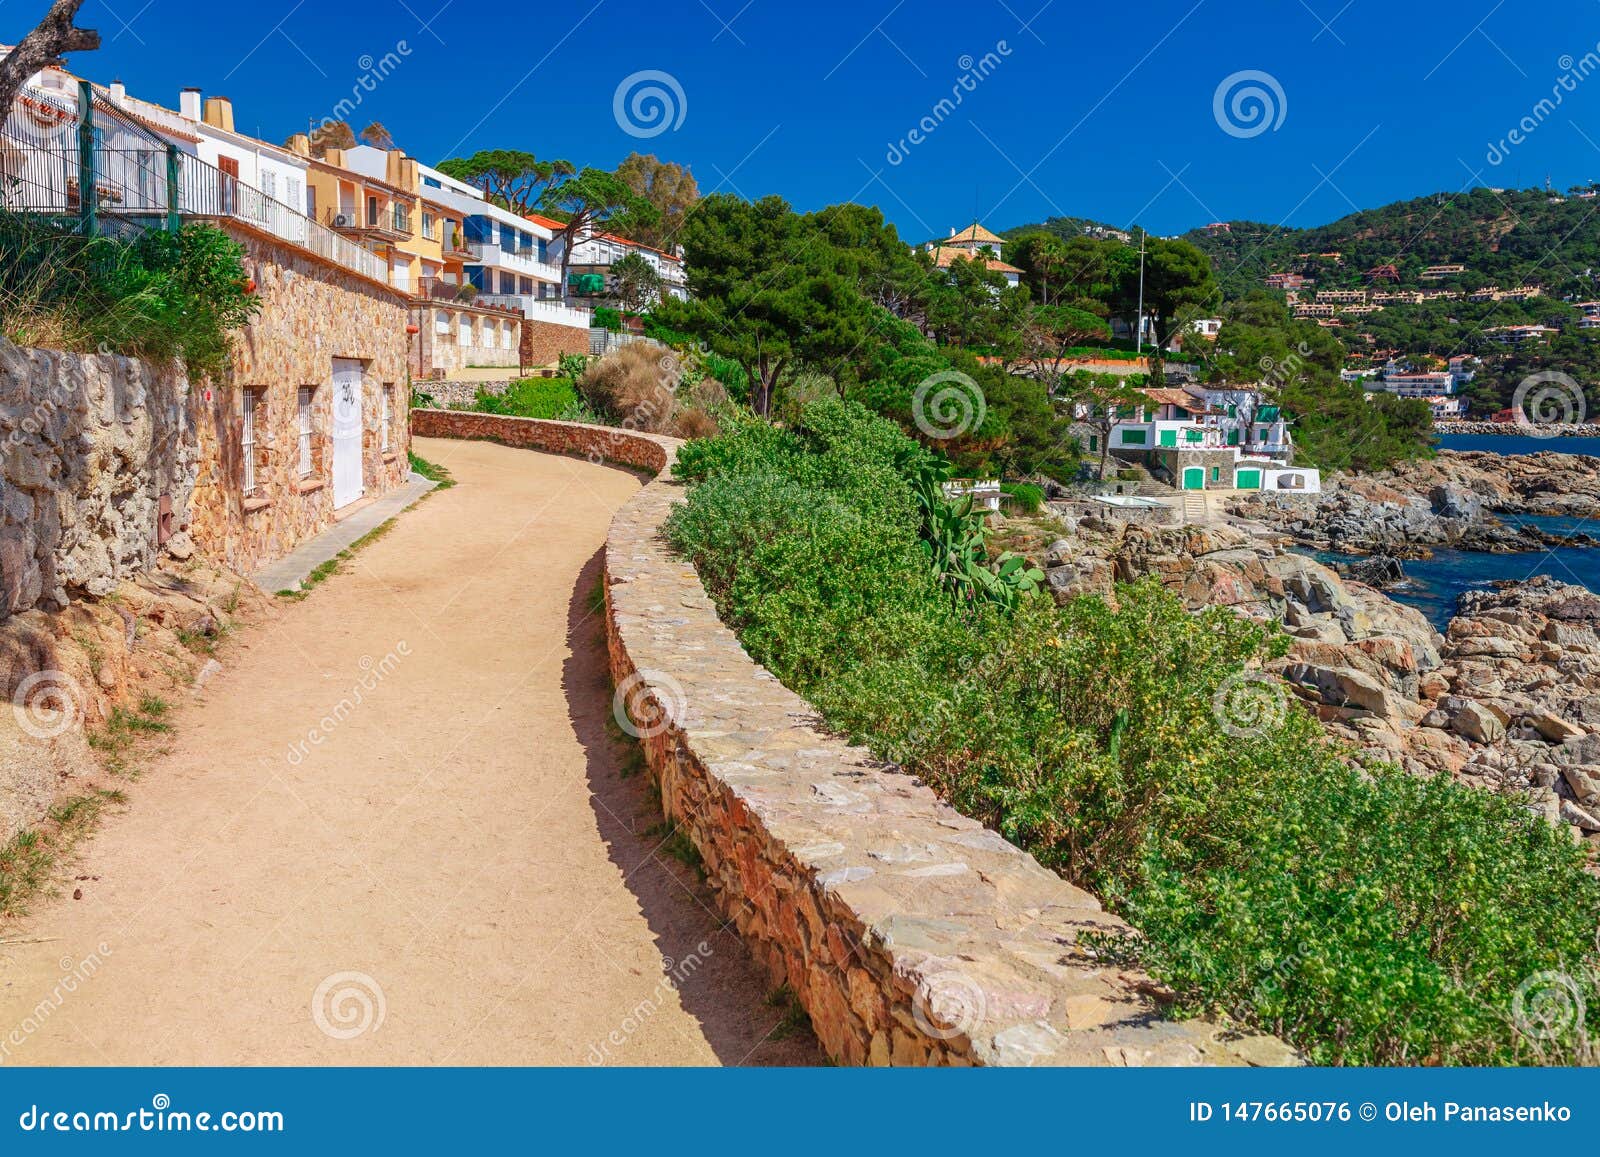 sea landscape with road near calella de palafrugell, catalonia, spain near barcelona. scenic village with nice sand beach and